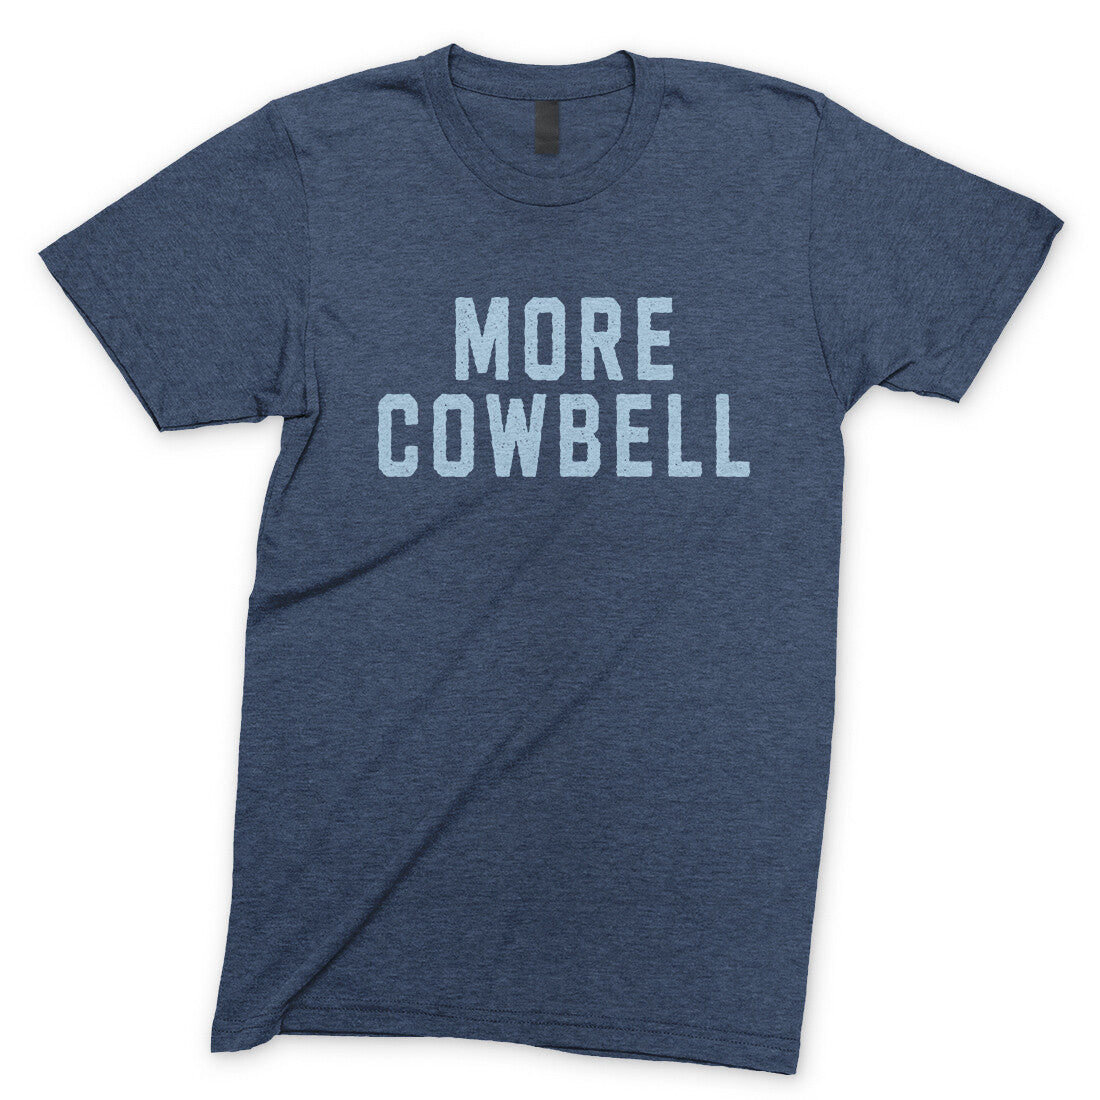 More Cowbell in Navy Heather Color